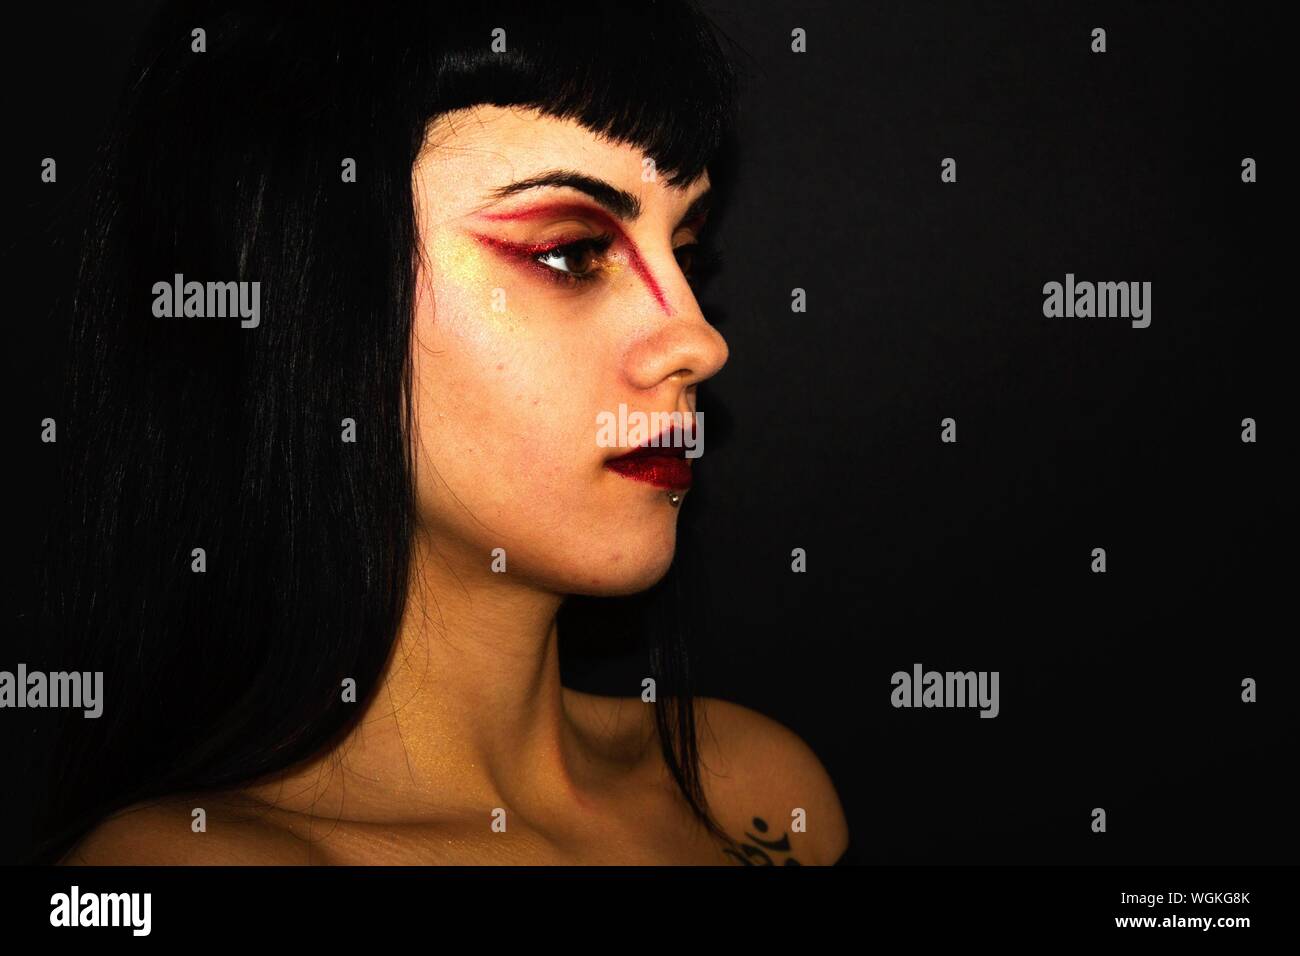 Close-up Of Woman With Red Eyeshadow Looking Away Against Black Background Stock Photo